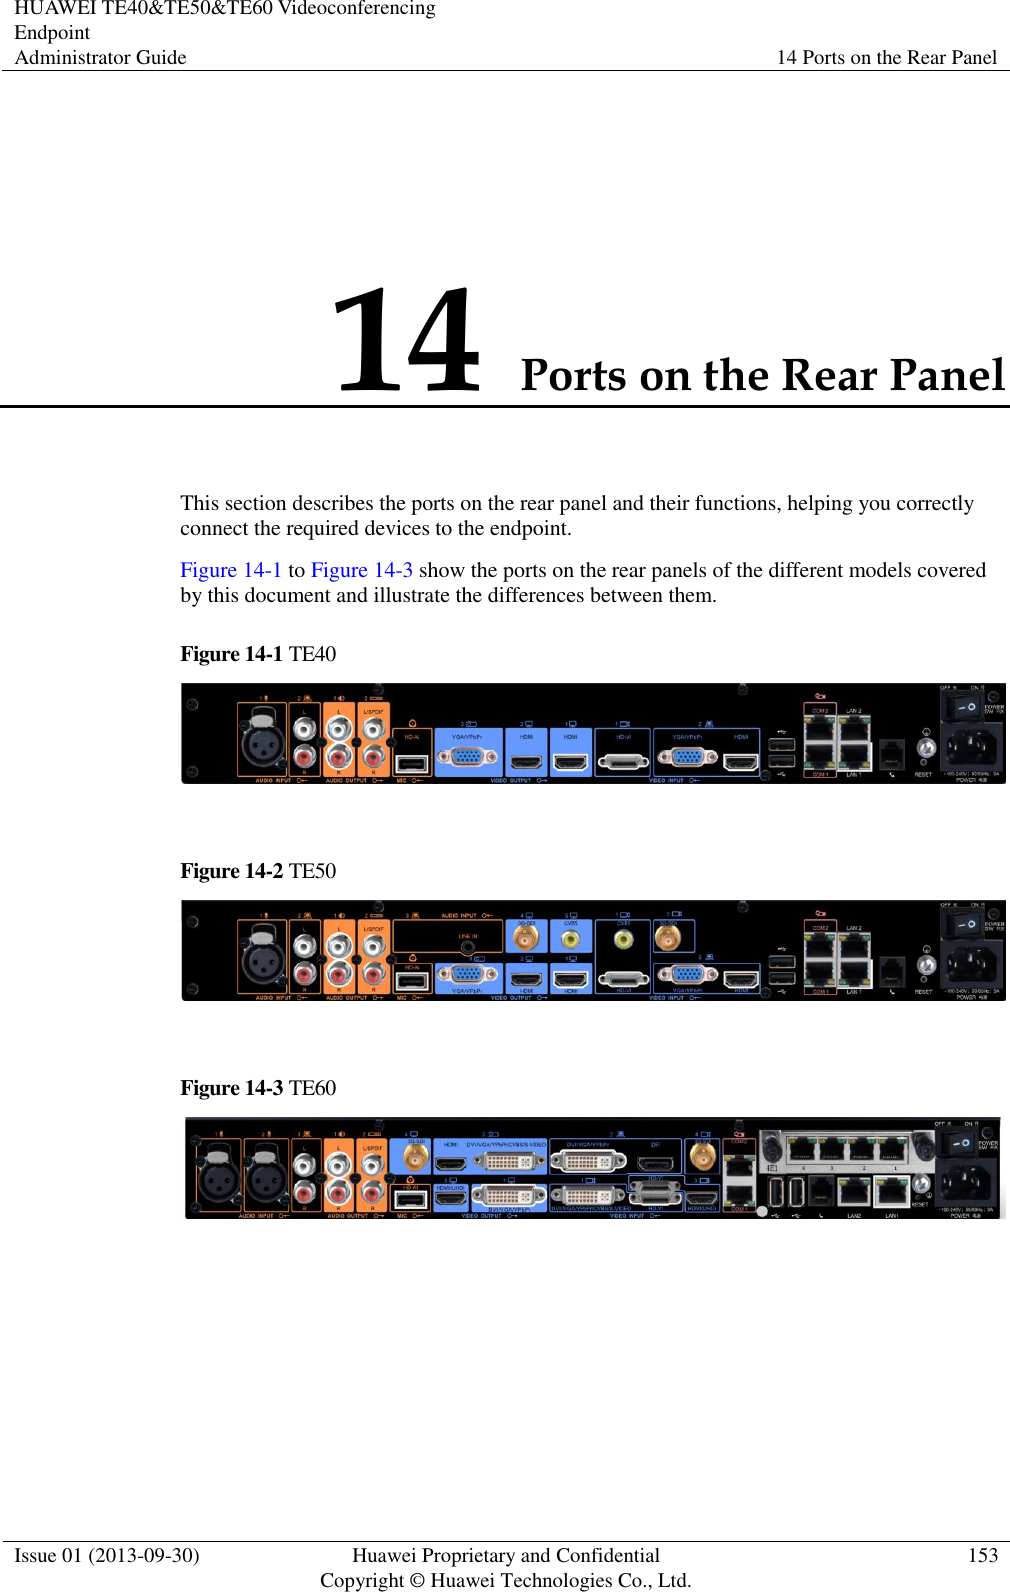 HUAWEI TE40&amp;TE50&amp;TE60 Videoconferencing Endpoint Administrator Guide 14 Ports on the Rear Panel  Issue 01 (2013-09-30) Huawei Proprietary and Confidential                                     Copyright © Huawei Technologies Co., Ltd. 153  14 Ports on the Rear Panel This section describes the ports on the rear panel and their functions, helping you correctly connect the required devices to the endpoint. Figure 14-1 to Figure 14-3 show the ports on the rear panels of the different models covered by this document and illustrate the differences between them. Figure 14-1 TE40   Figure 14-2 TE50   Figure 14-3 TE60  